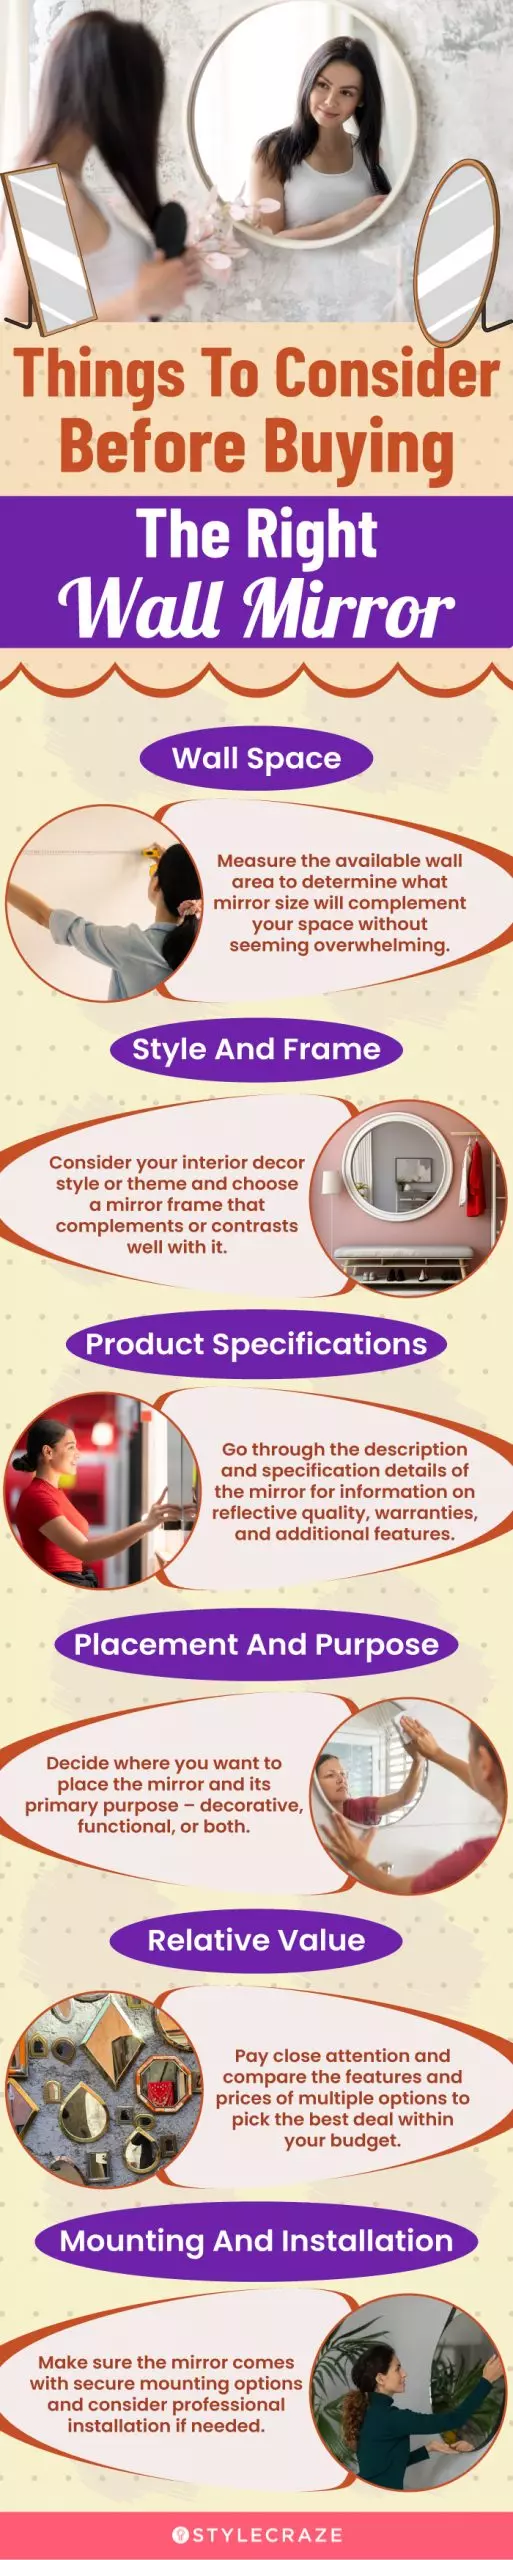 6 Factors To Determine The Right Wall Mirror For You (infographic)